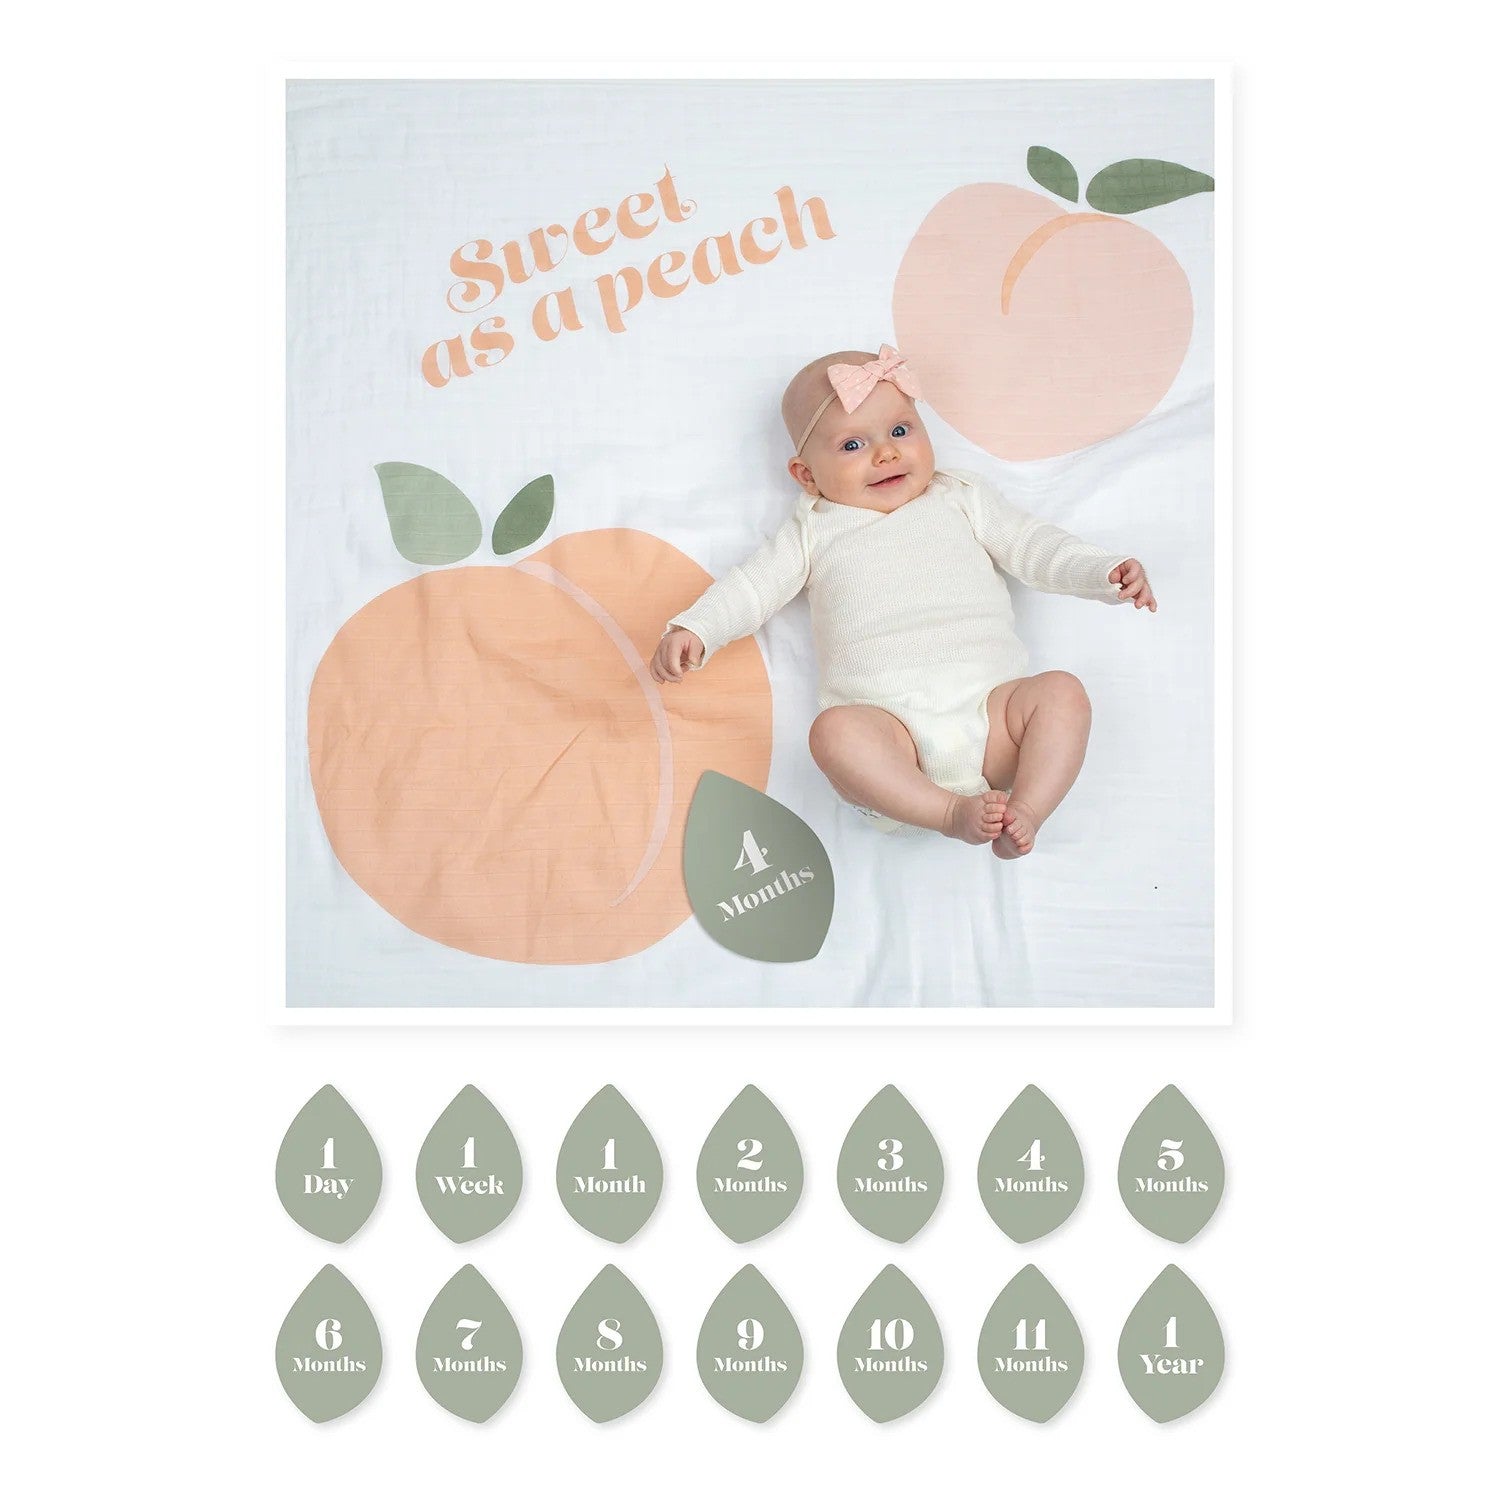 Gift set containing a white blanket with a peach design and 7 green double-sided milestone cards